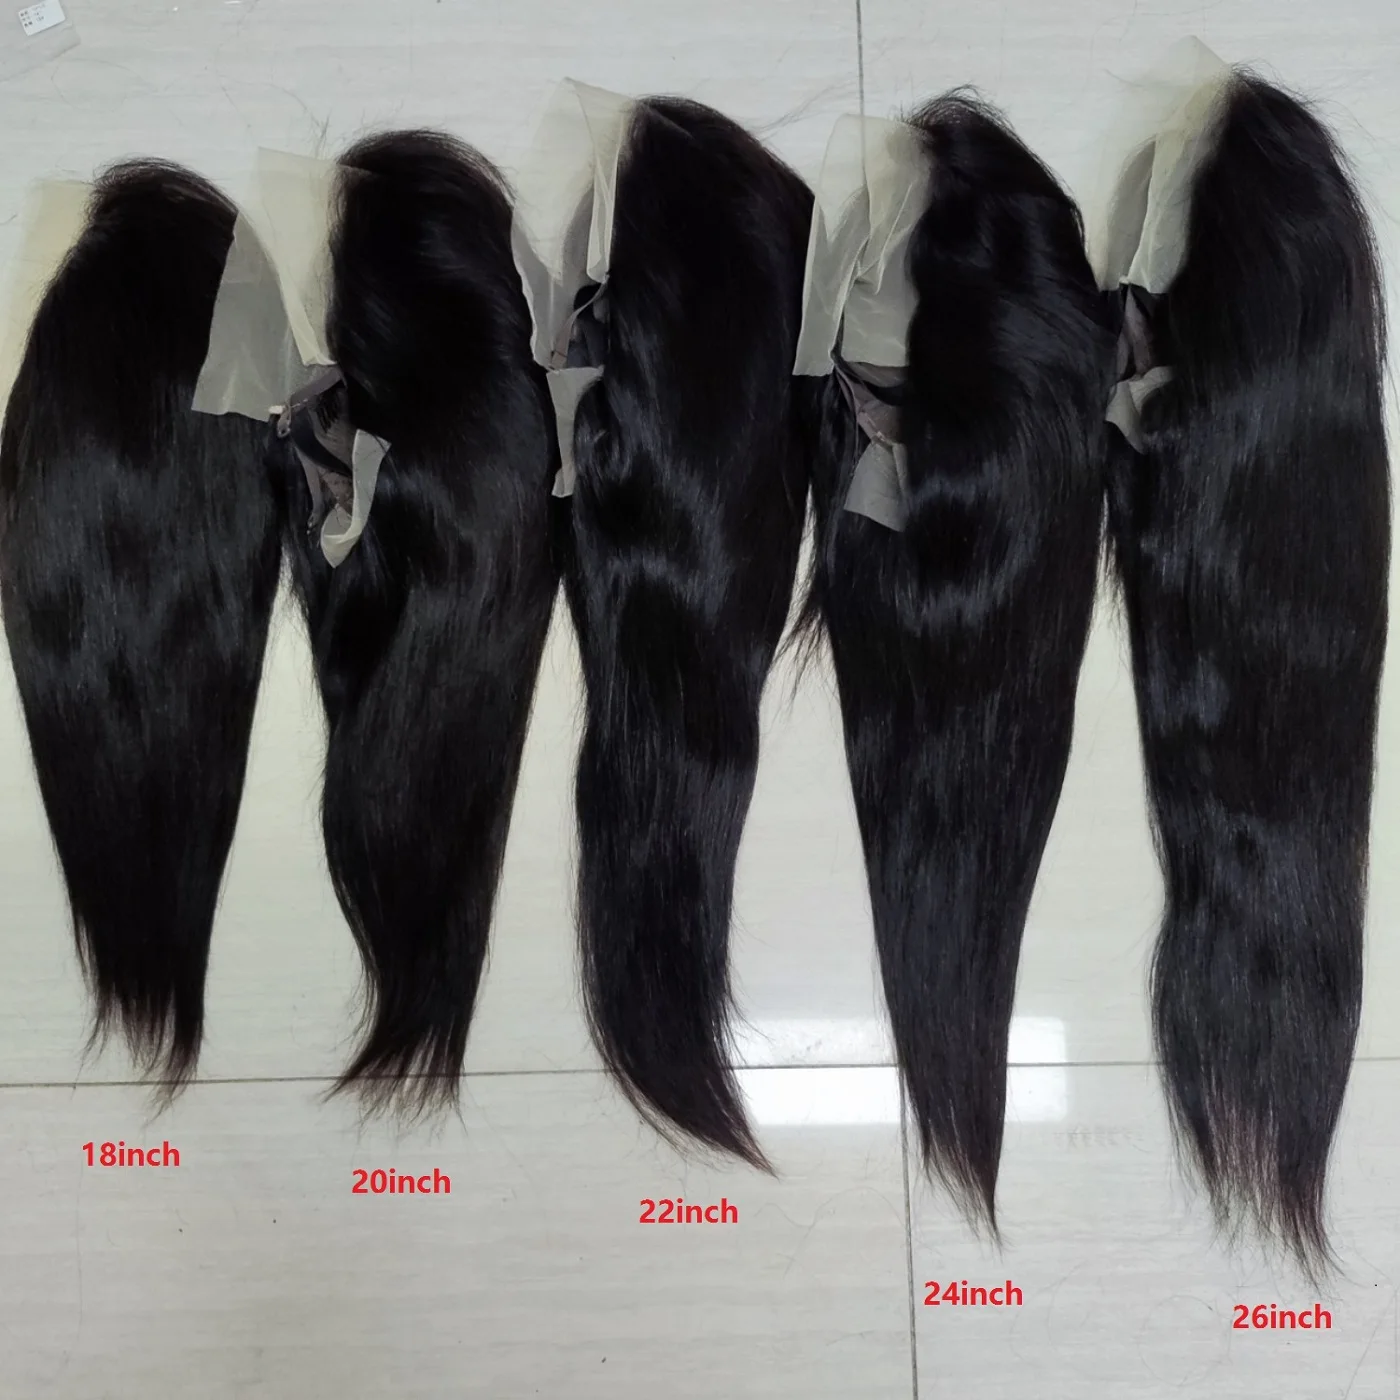 

Letsfly Wholesale Cheap Custom-Made Ear to Ear Lace Frontal Wigs 16inch-30inch Human Natural Hair With Closure 9A Wigs